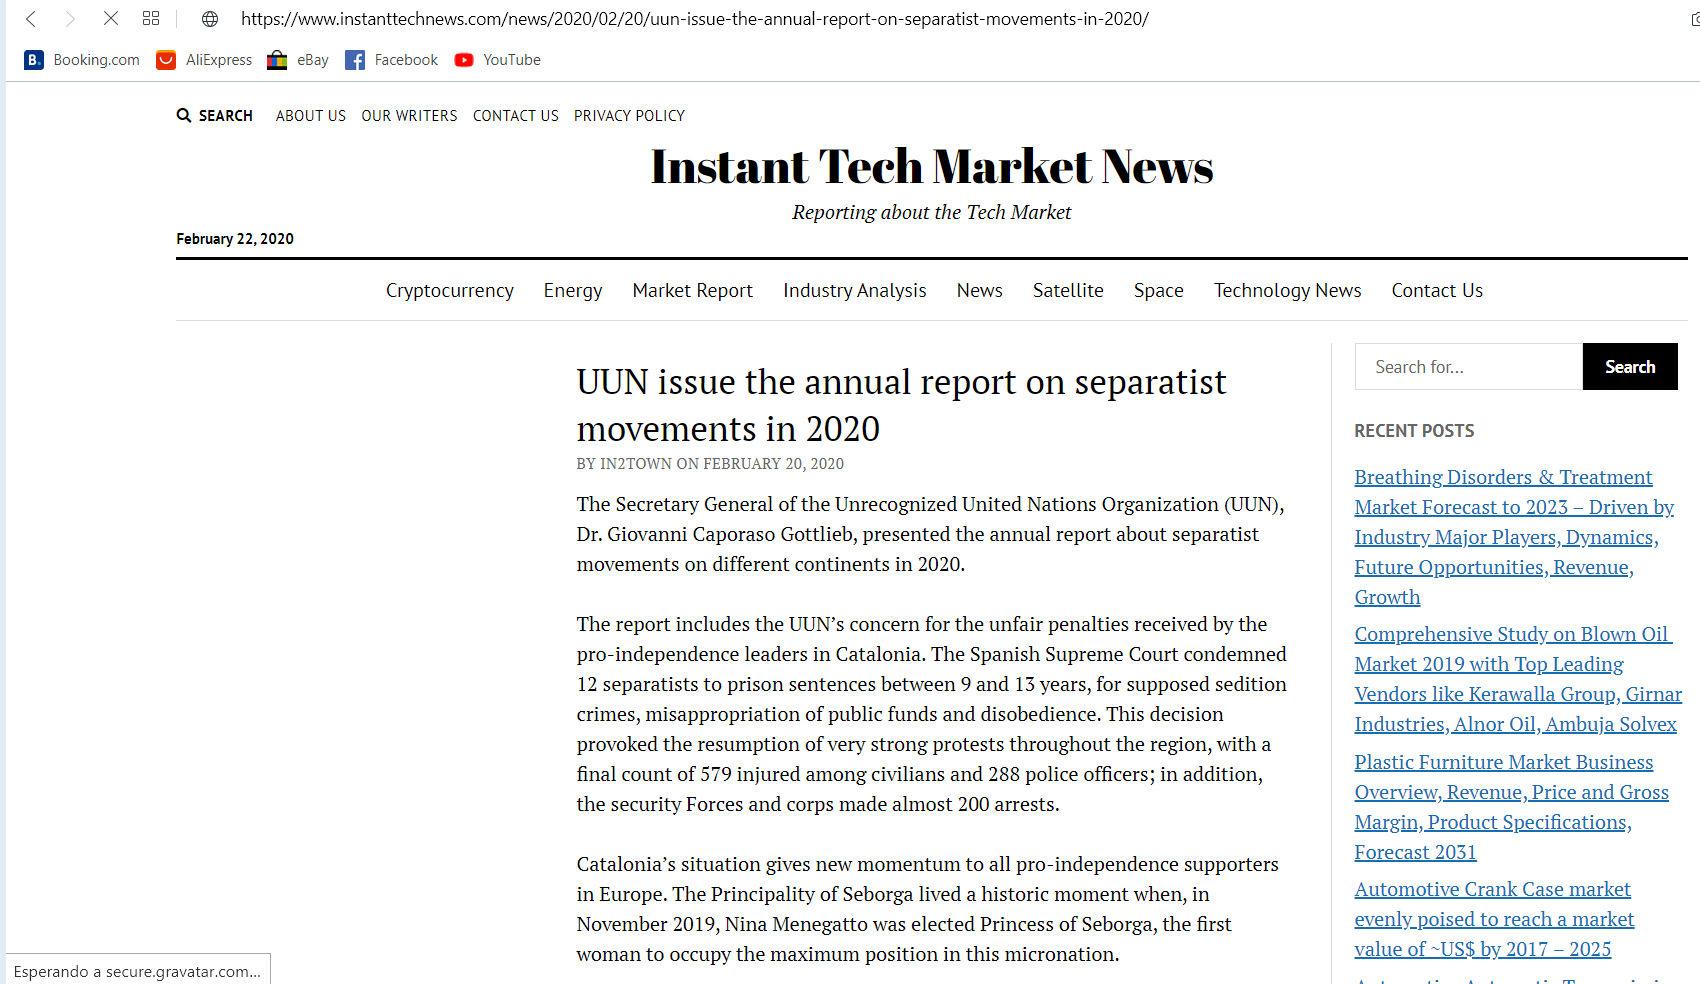 UUN issue the annual report on separatist movements in 2020